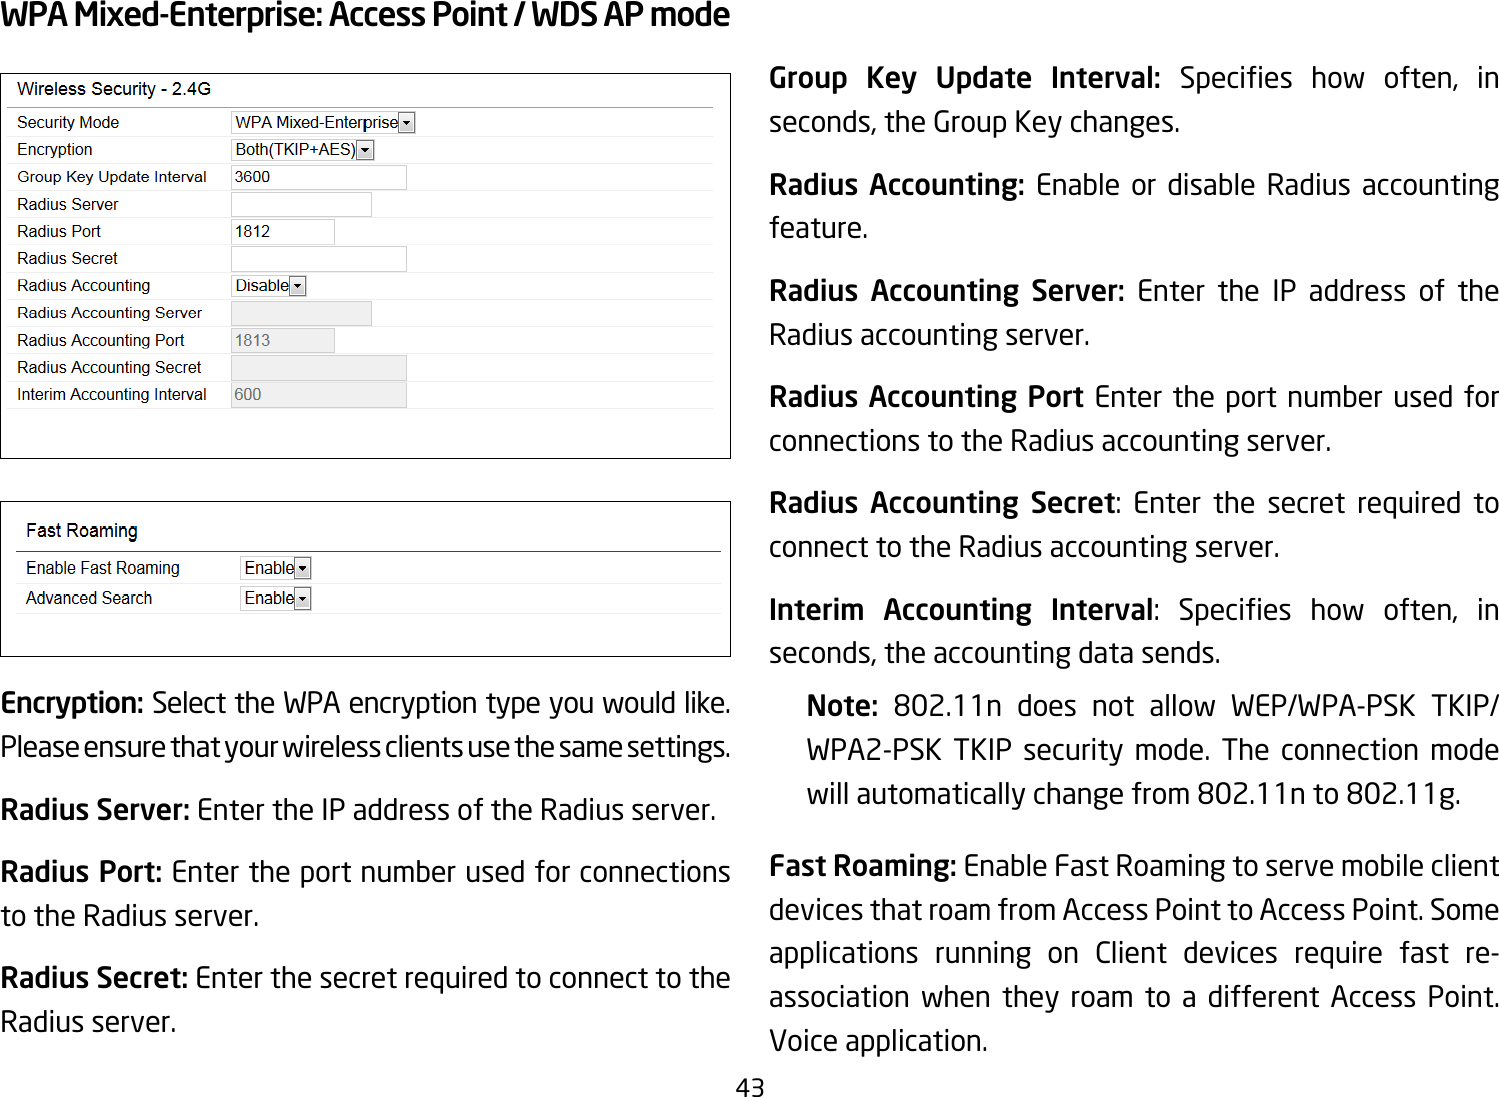 43WPA Mixed-Enterprise: Access Point / WDS AP modeEncryption: Select the WPA encryption type you would like. Please ensure that your wireless clients use the same settings.Radius Server: Enter the IP address of the Radius server.Radius Port: Enter the port number used for connections to the Radius server.Radius Secret: Enter the secret required to connect to the Radius server. Group Key Update Interval: Species how often, inseconds, the Group Key changes.Radius Accounting: Enable or disable Radius accounting feature.Radius Accounting Server: Enter the IP address of the Radius accounting server.Radius Accounting Port Enter the port number used for connections to the Radius accounting server.Radius Accounting Secret: Enter the secret required to connect to the Radius accounting server.Interim Accounting Interval: Species how often, inseconds, the accounting data sends.Note:  802.11n does not allow WEP/WPA-PSK TKIP/WPA2-PSK TKIP security mode. The connection mode will automatically change from 802.11n to 802.11g.Fast Roaming: Enable Fast Roaming to serve mobile client devices that roam from Access Point to Access Point. Some applications running on Client devices require fast re-association when they roam to a different Access Point. Voice application.